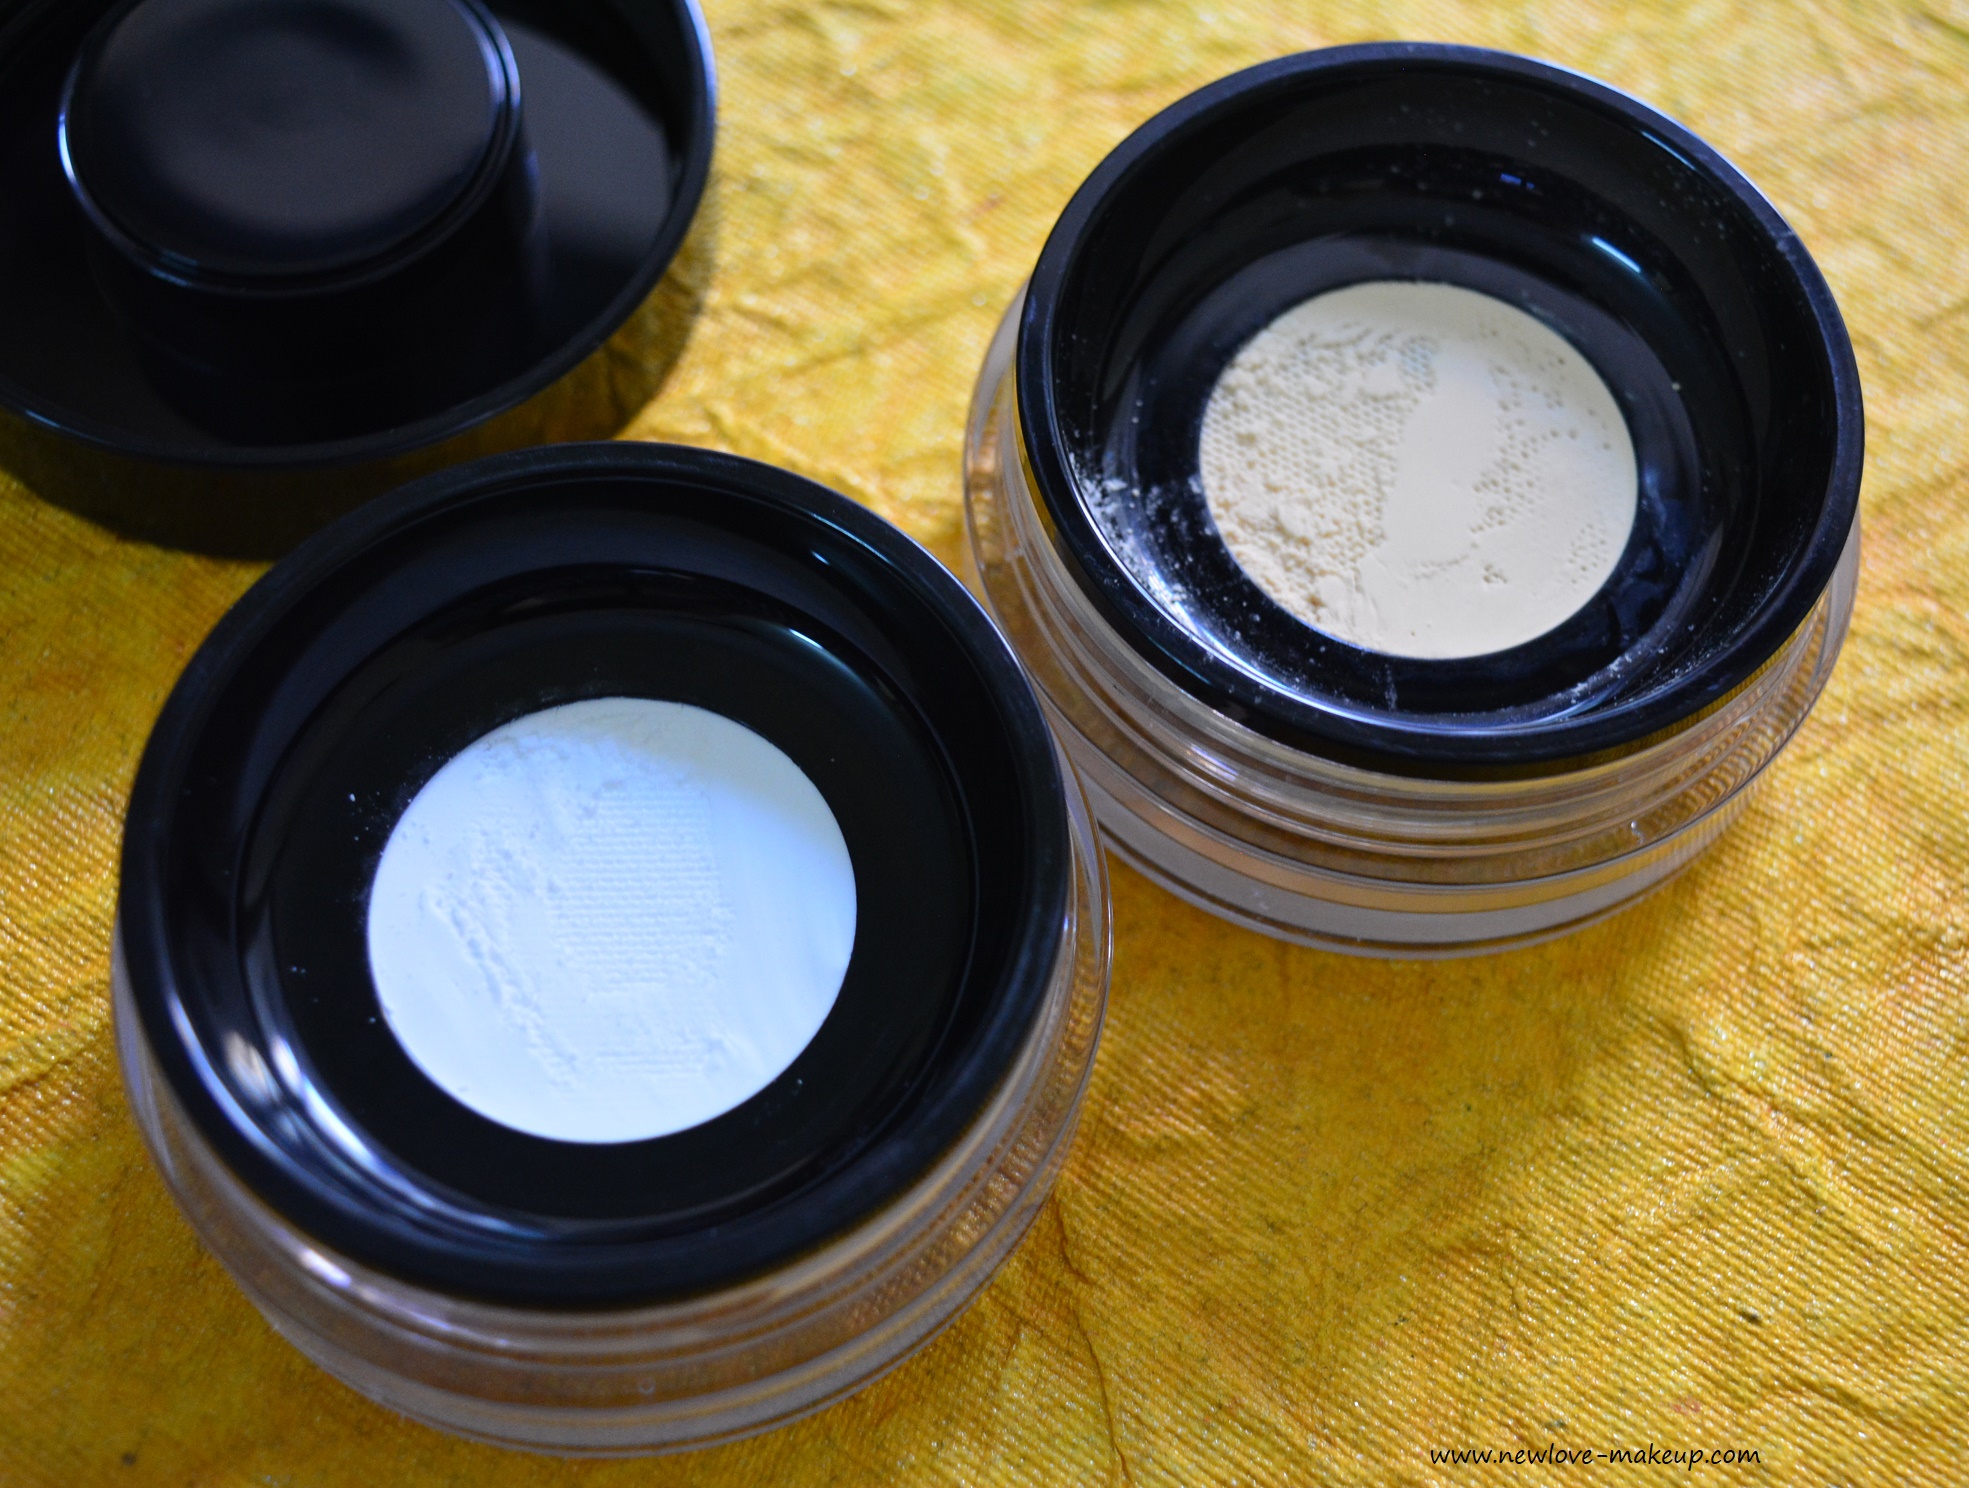 PAC Cosmetics Face Care/Eye Care Series, Long Lasting Kohl, HD Powders, New Launches Review